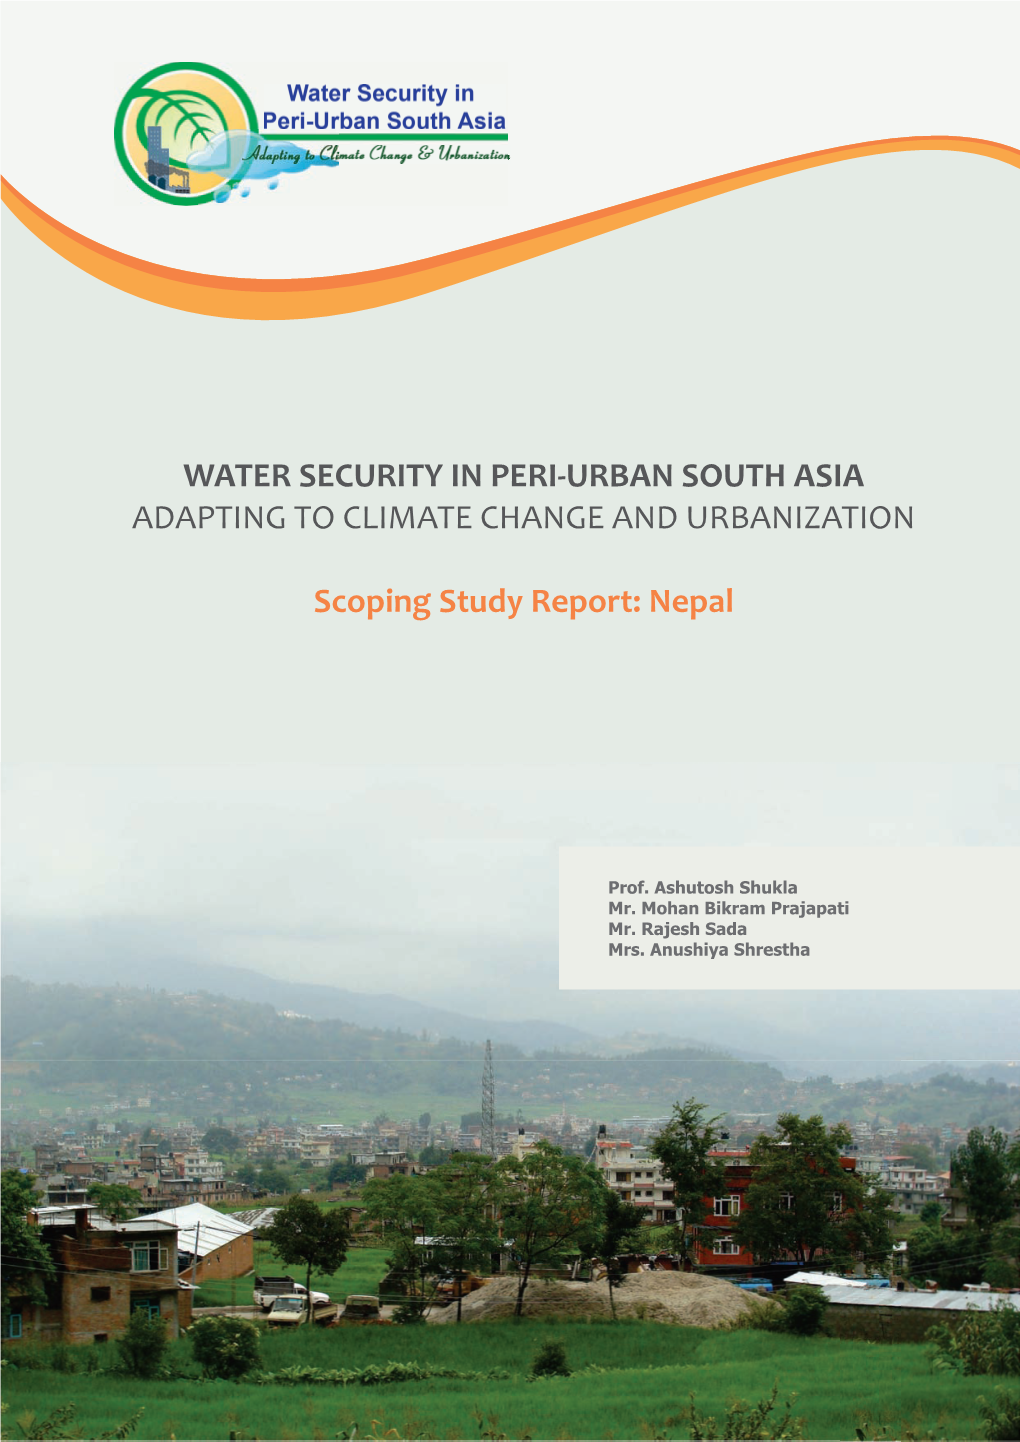 Water Security in Peri-Urban South Asia Adapting to Climate Change and Urbanization